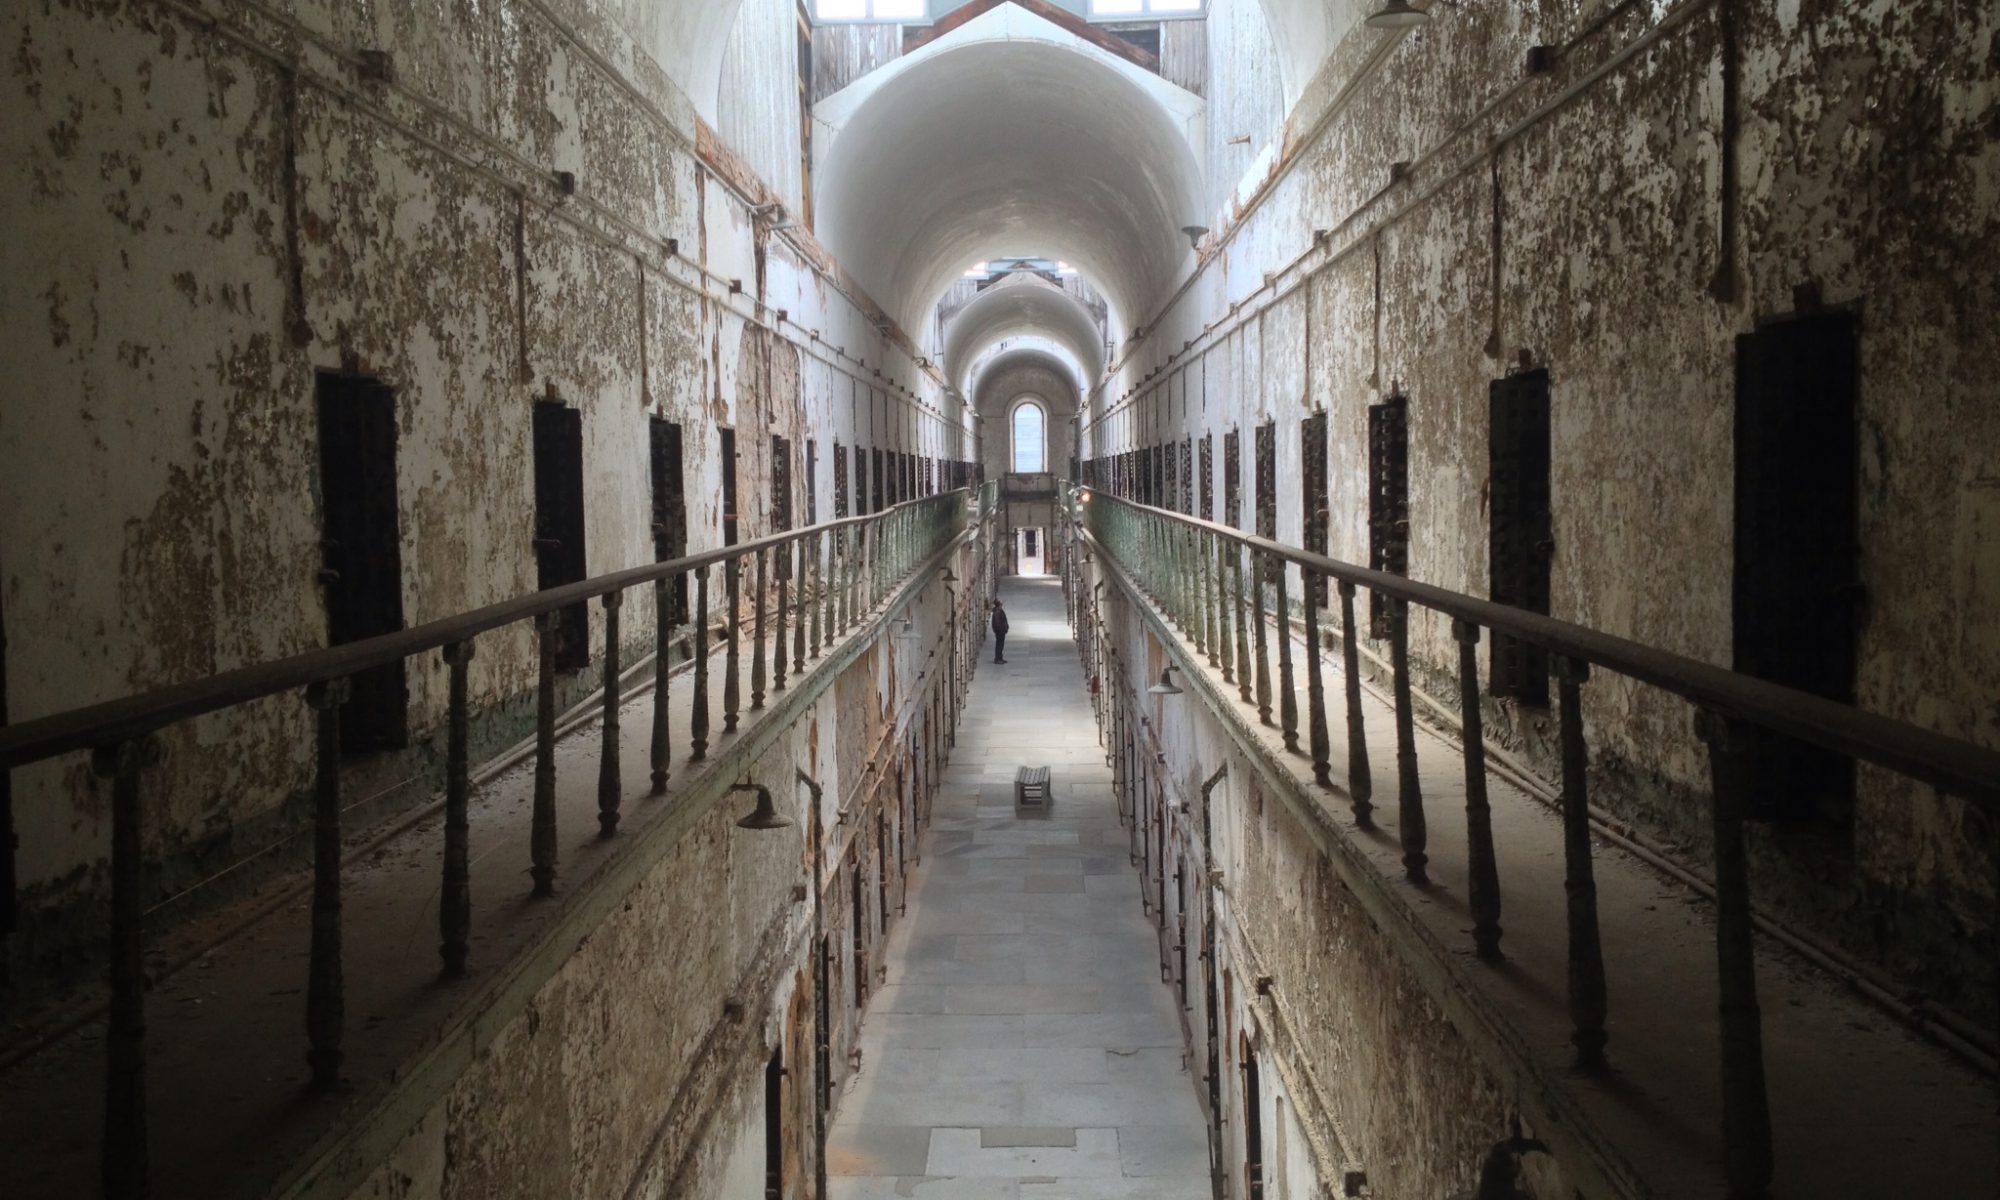 Photograph of a long hall of cells with light and a dome at the end